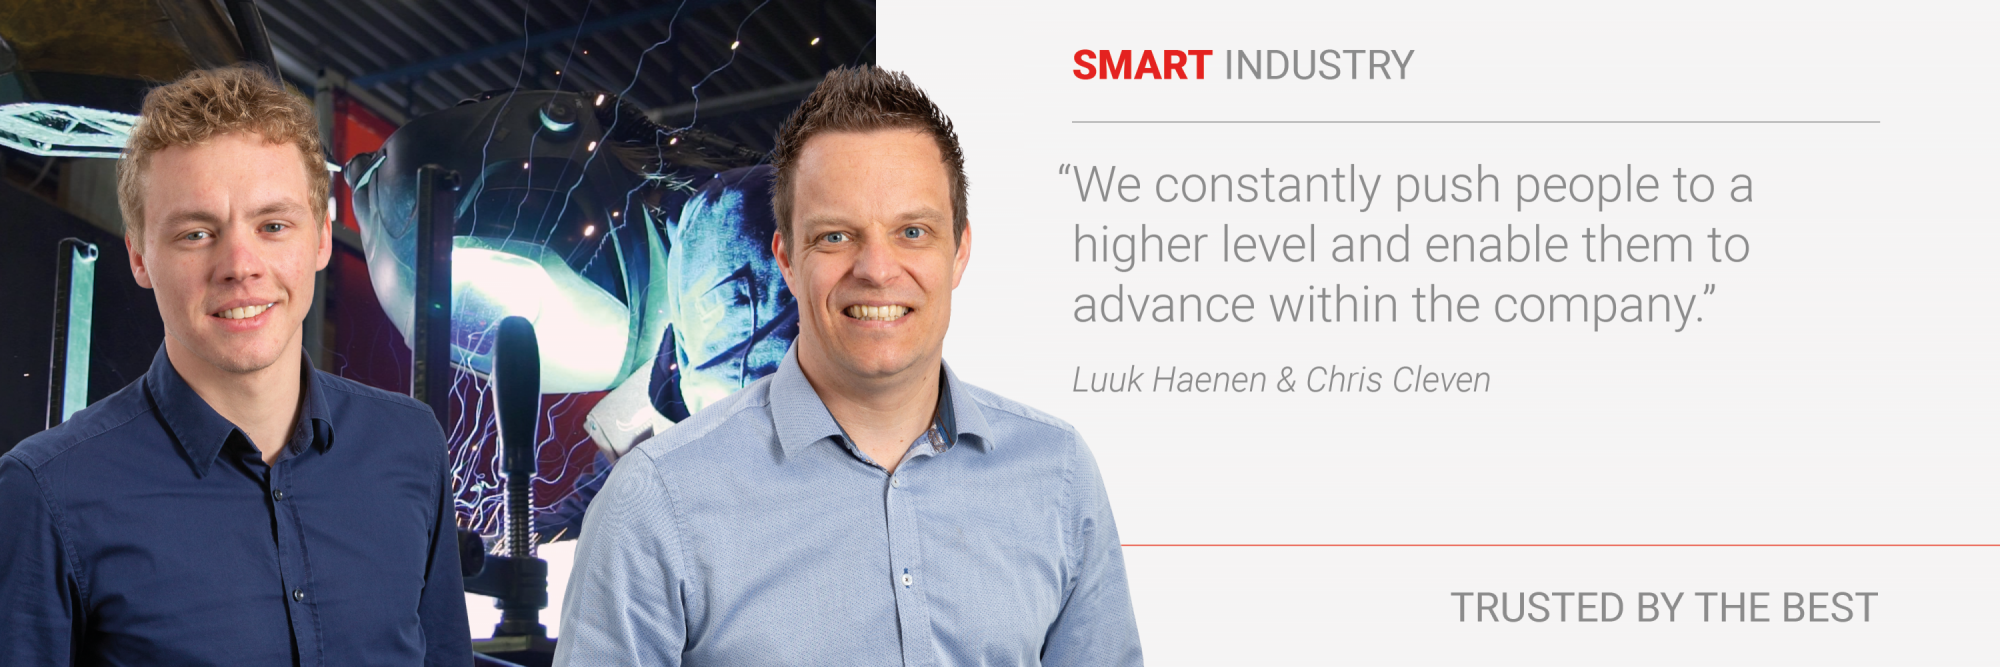 Smart Industry special - quote Luuk and Chris